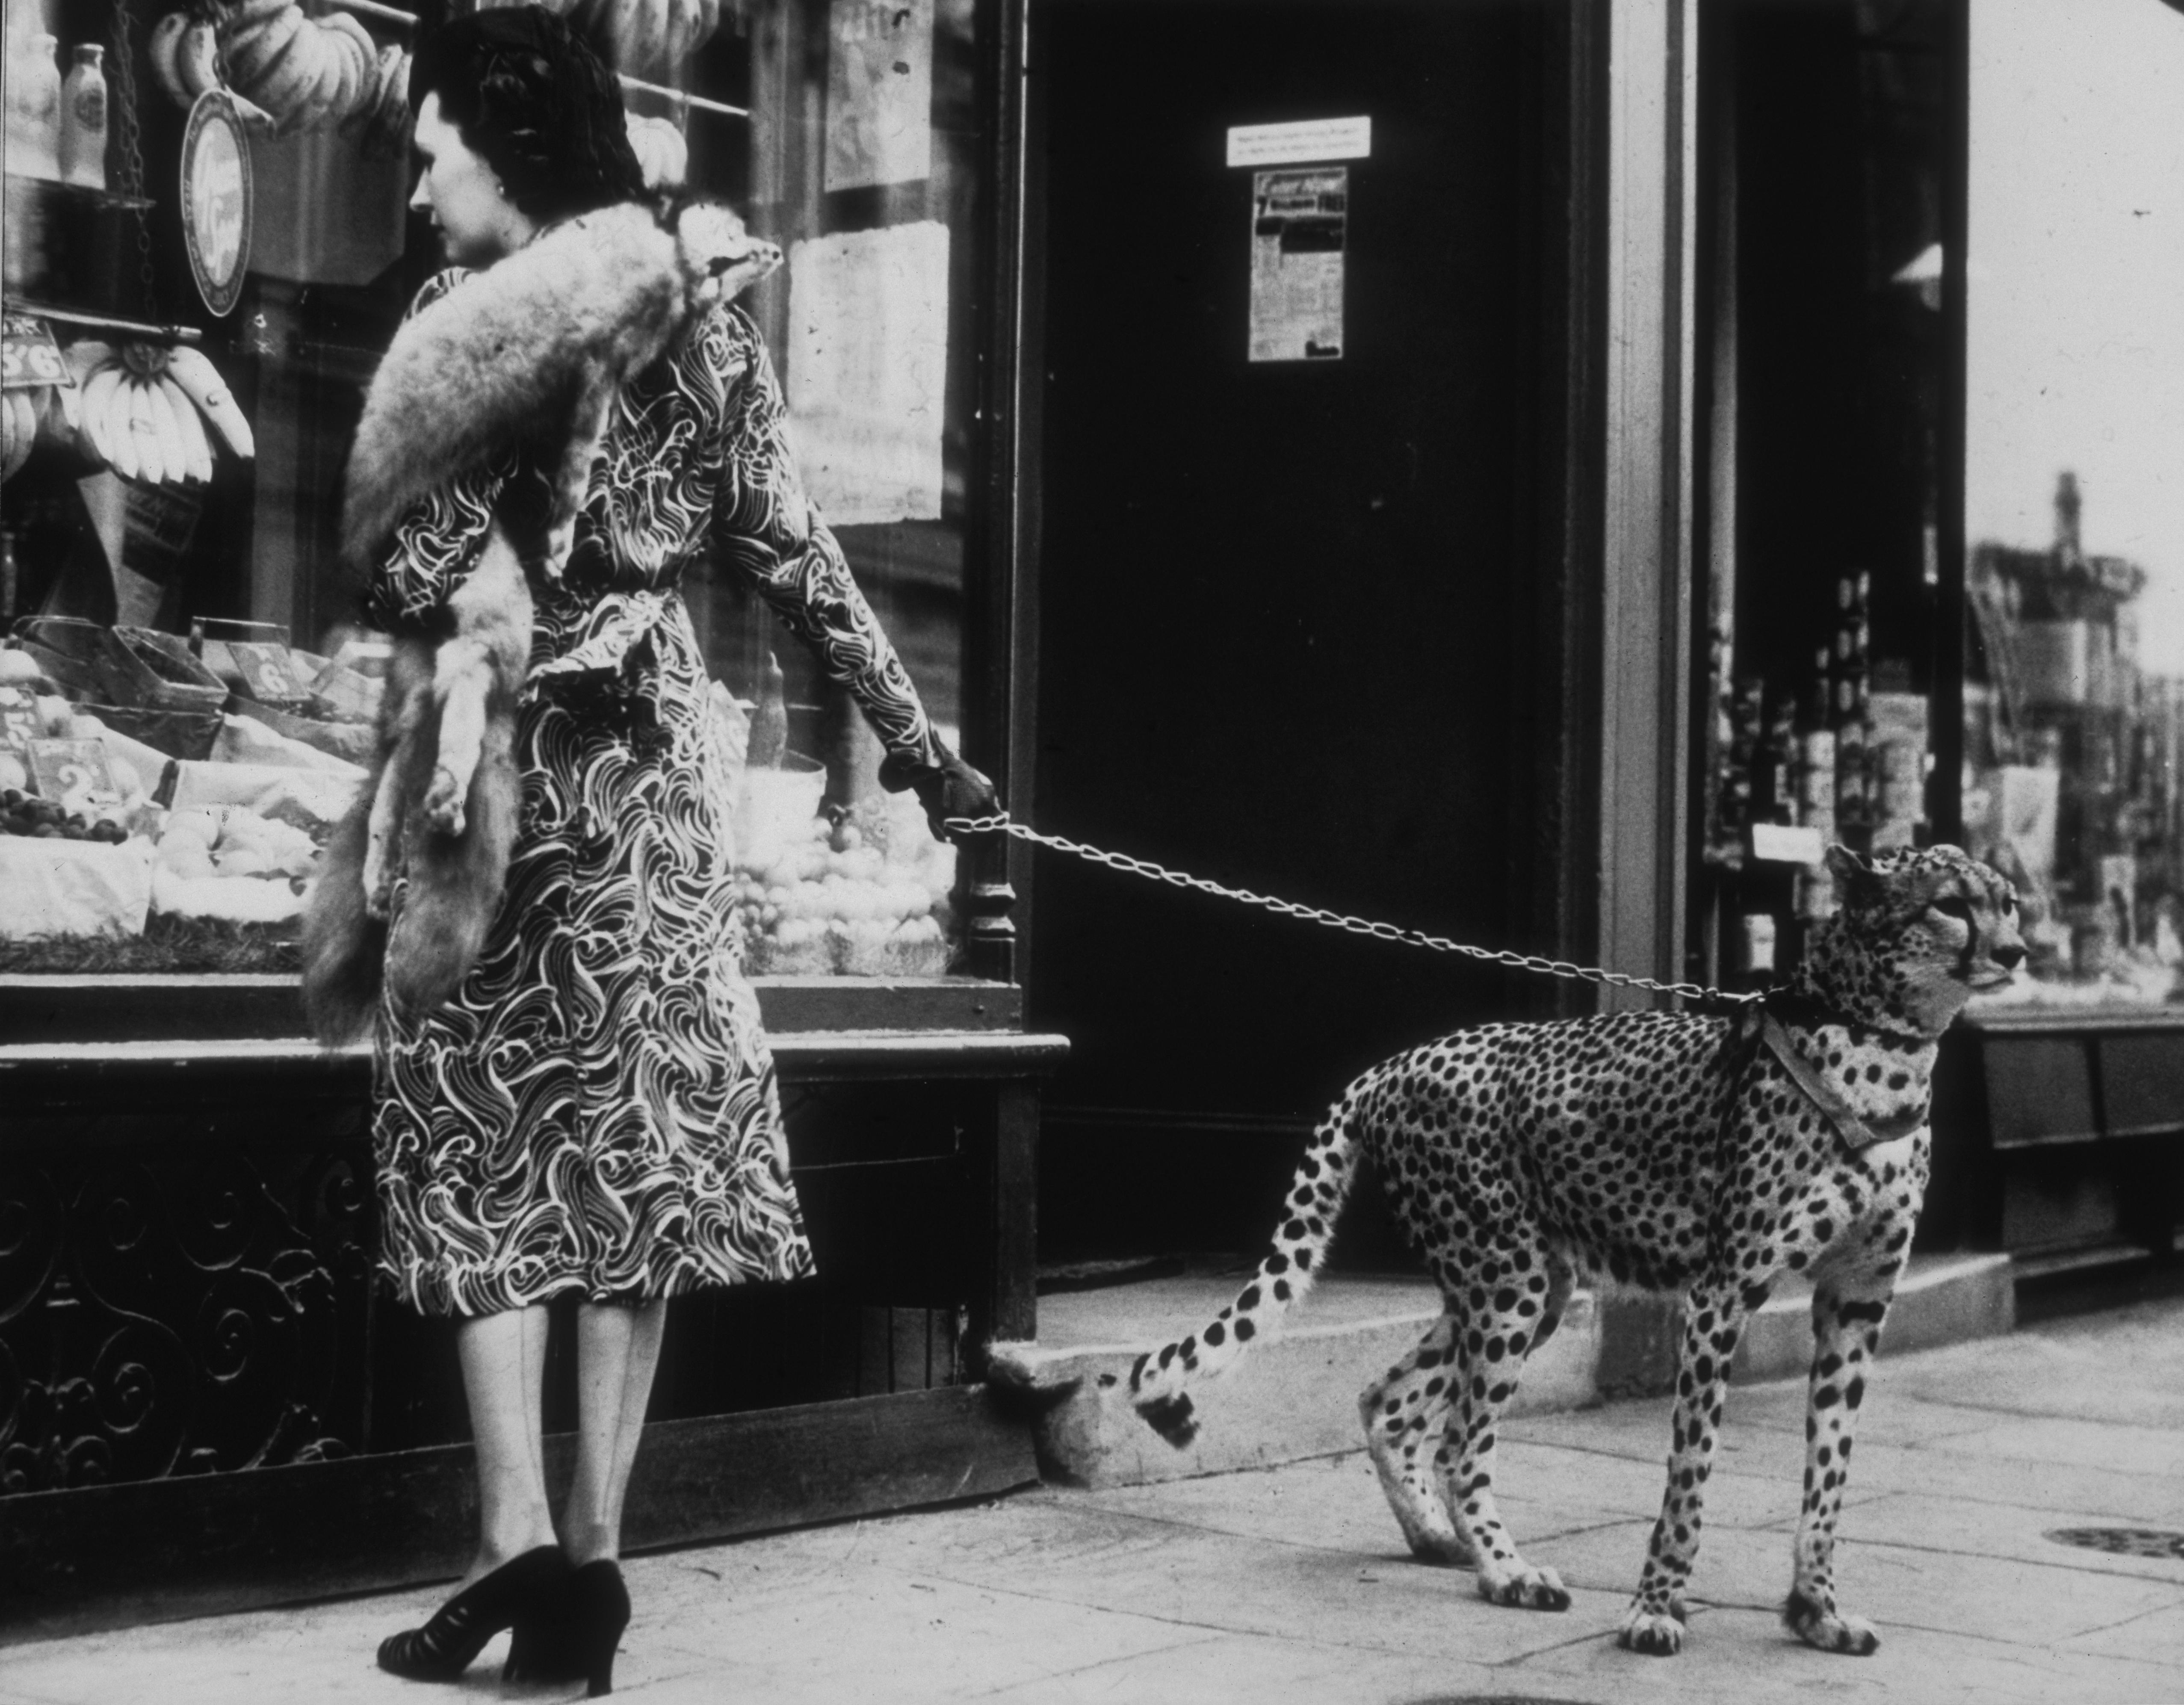 'Cheetah Who Shops' Limited Edition Photographic Print by Getty, 20x16